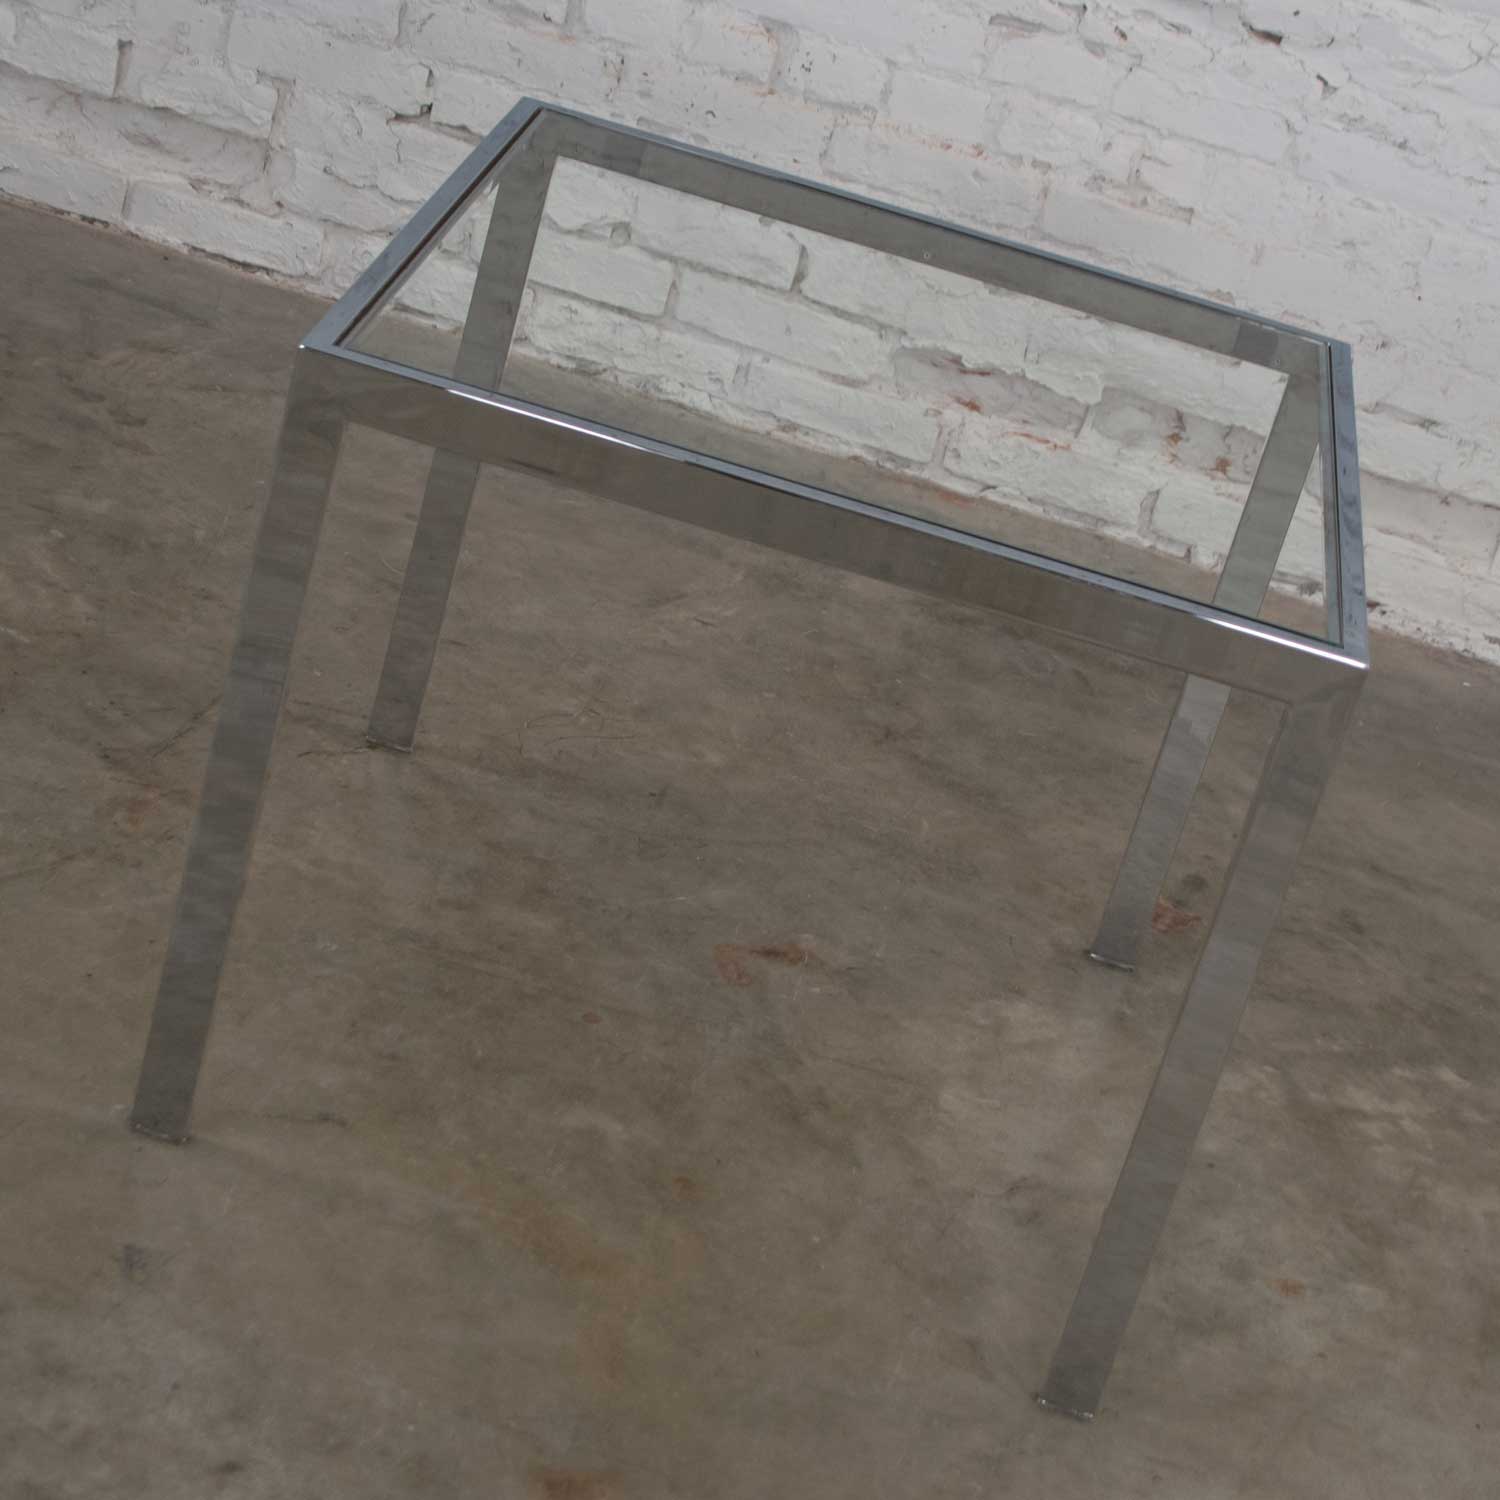 Vintage Mid Century Modern Chrome & Glass Parsons End or Side Table after Baughman